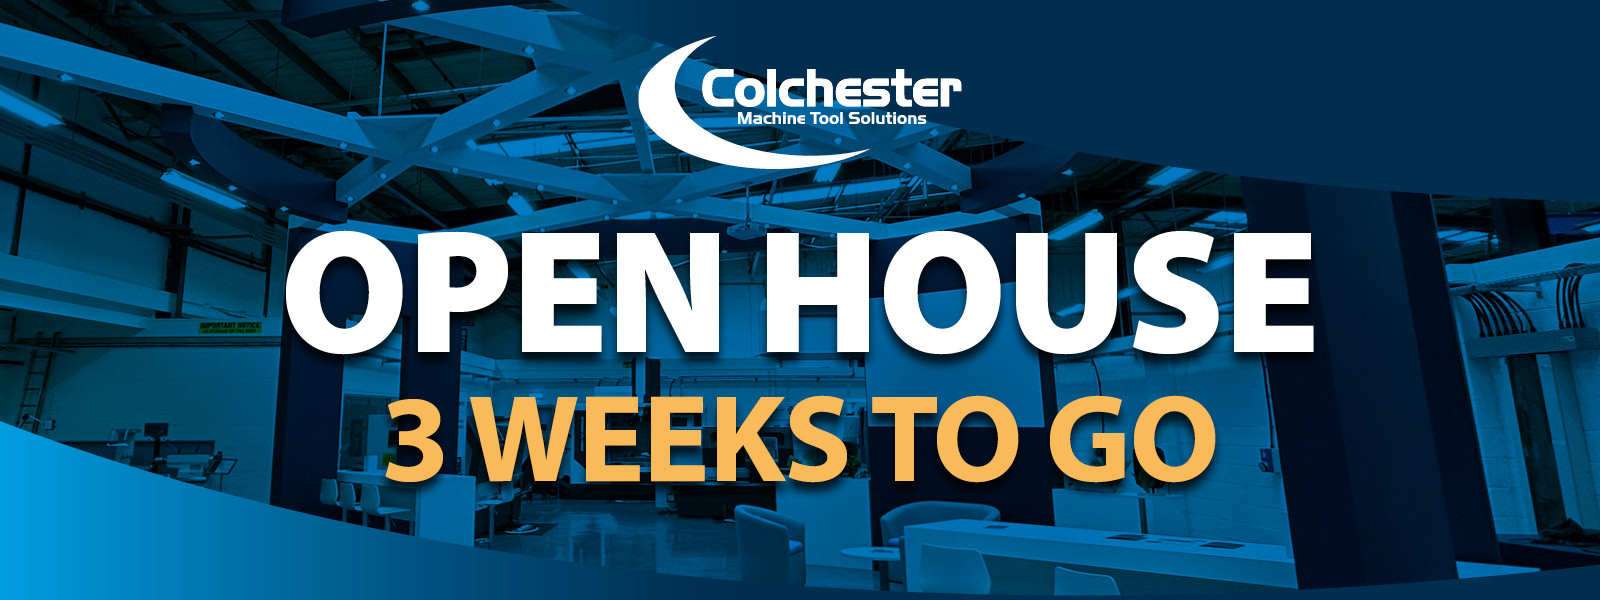 Only 3 weeks until Colchester Machine Tool Solutio...